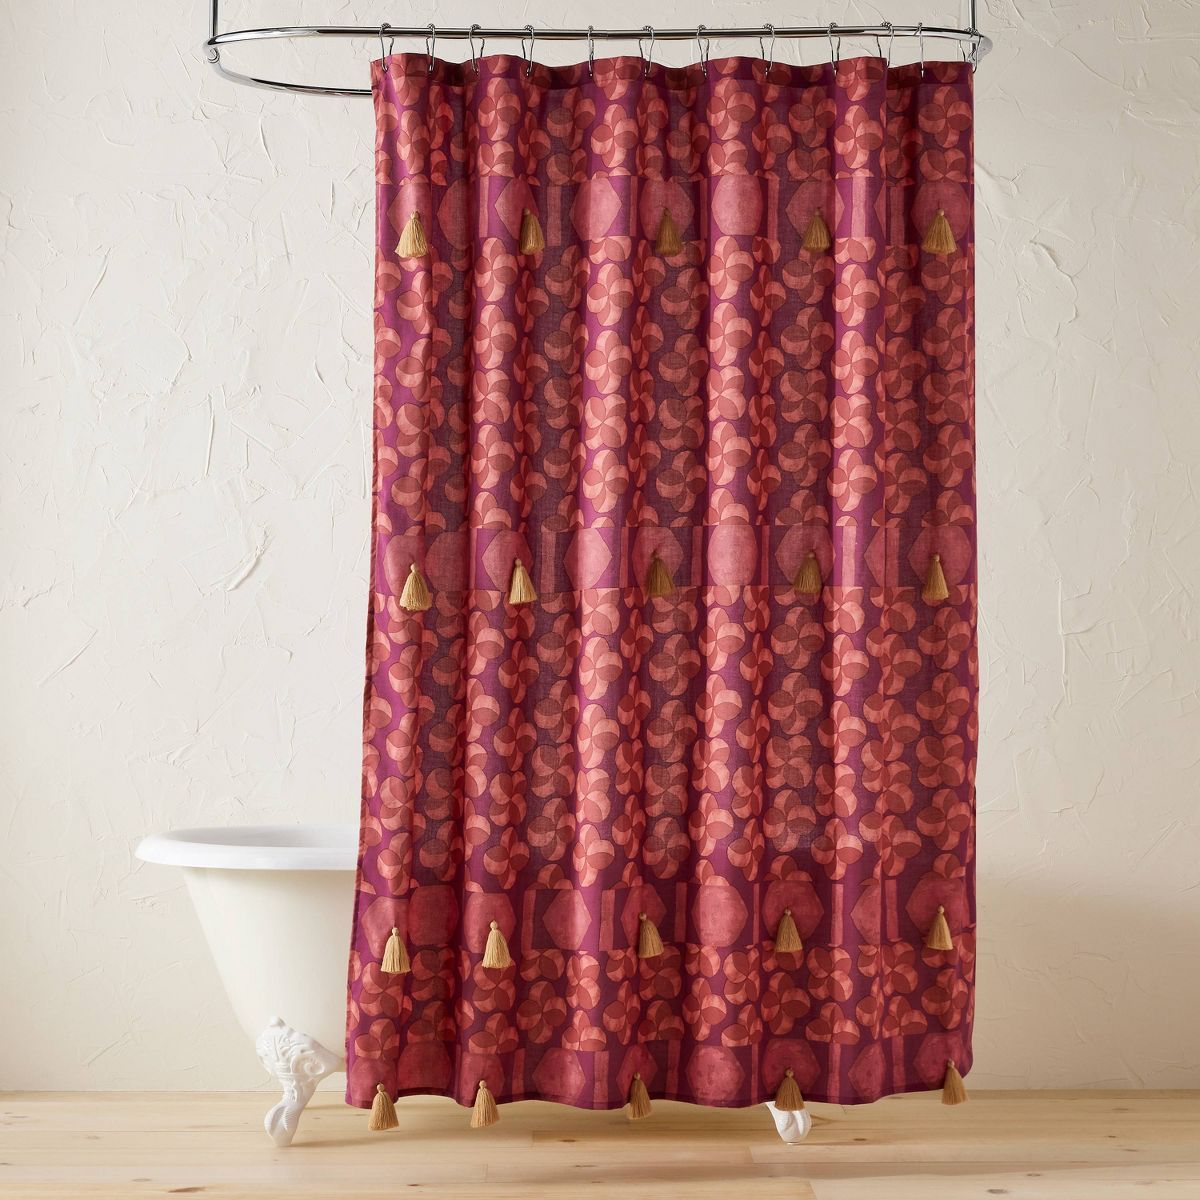 Seasons Go Round Shower Curtain with Tassels - Opalhouse™ designed by Jungalow™ | Target